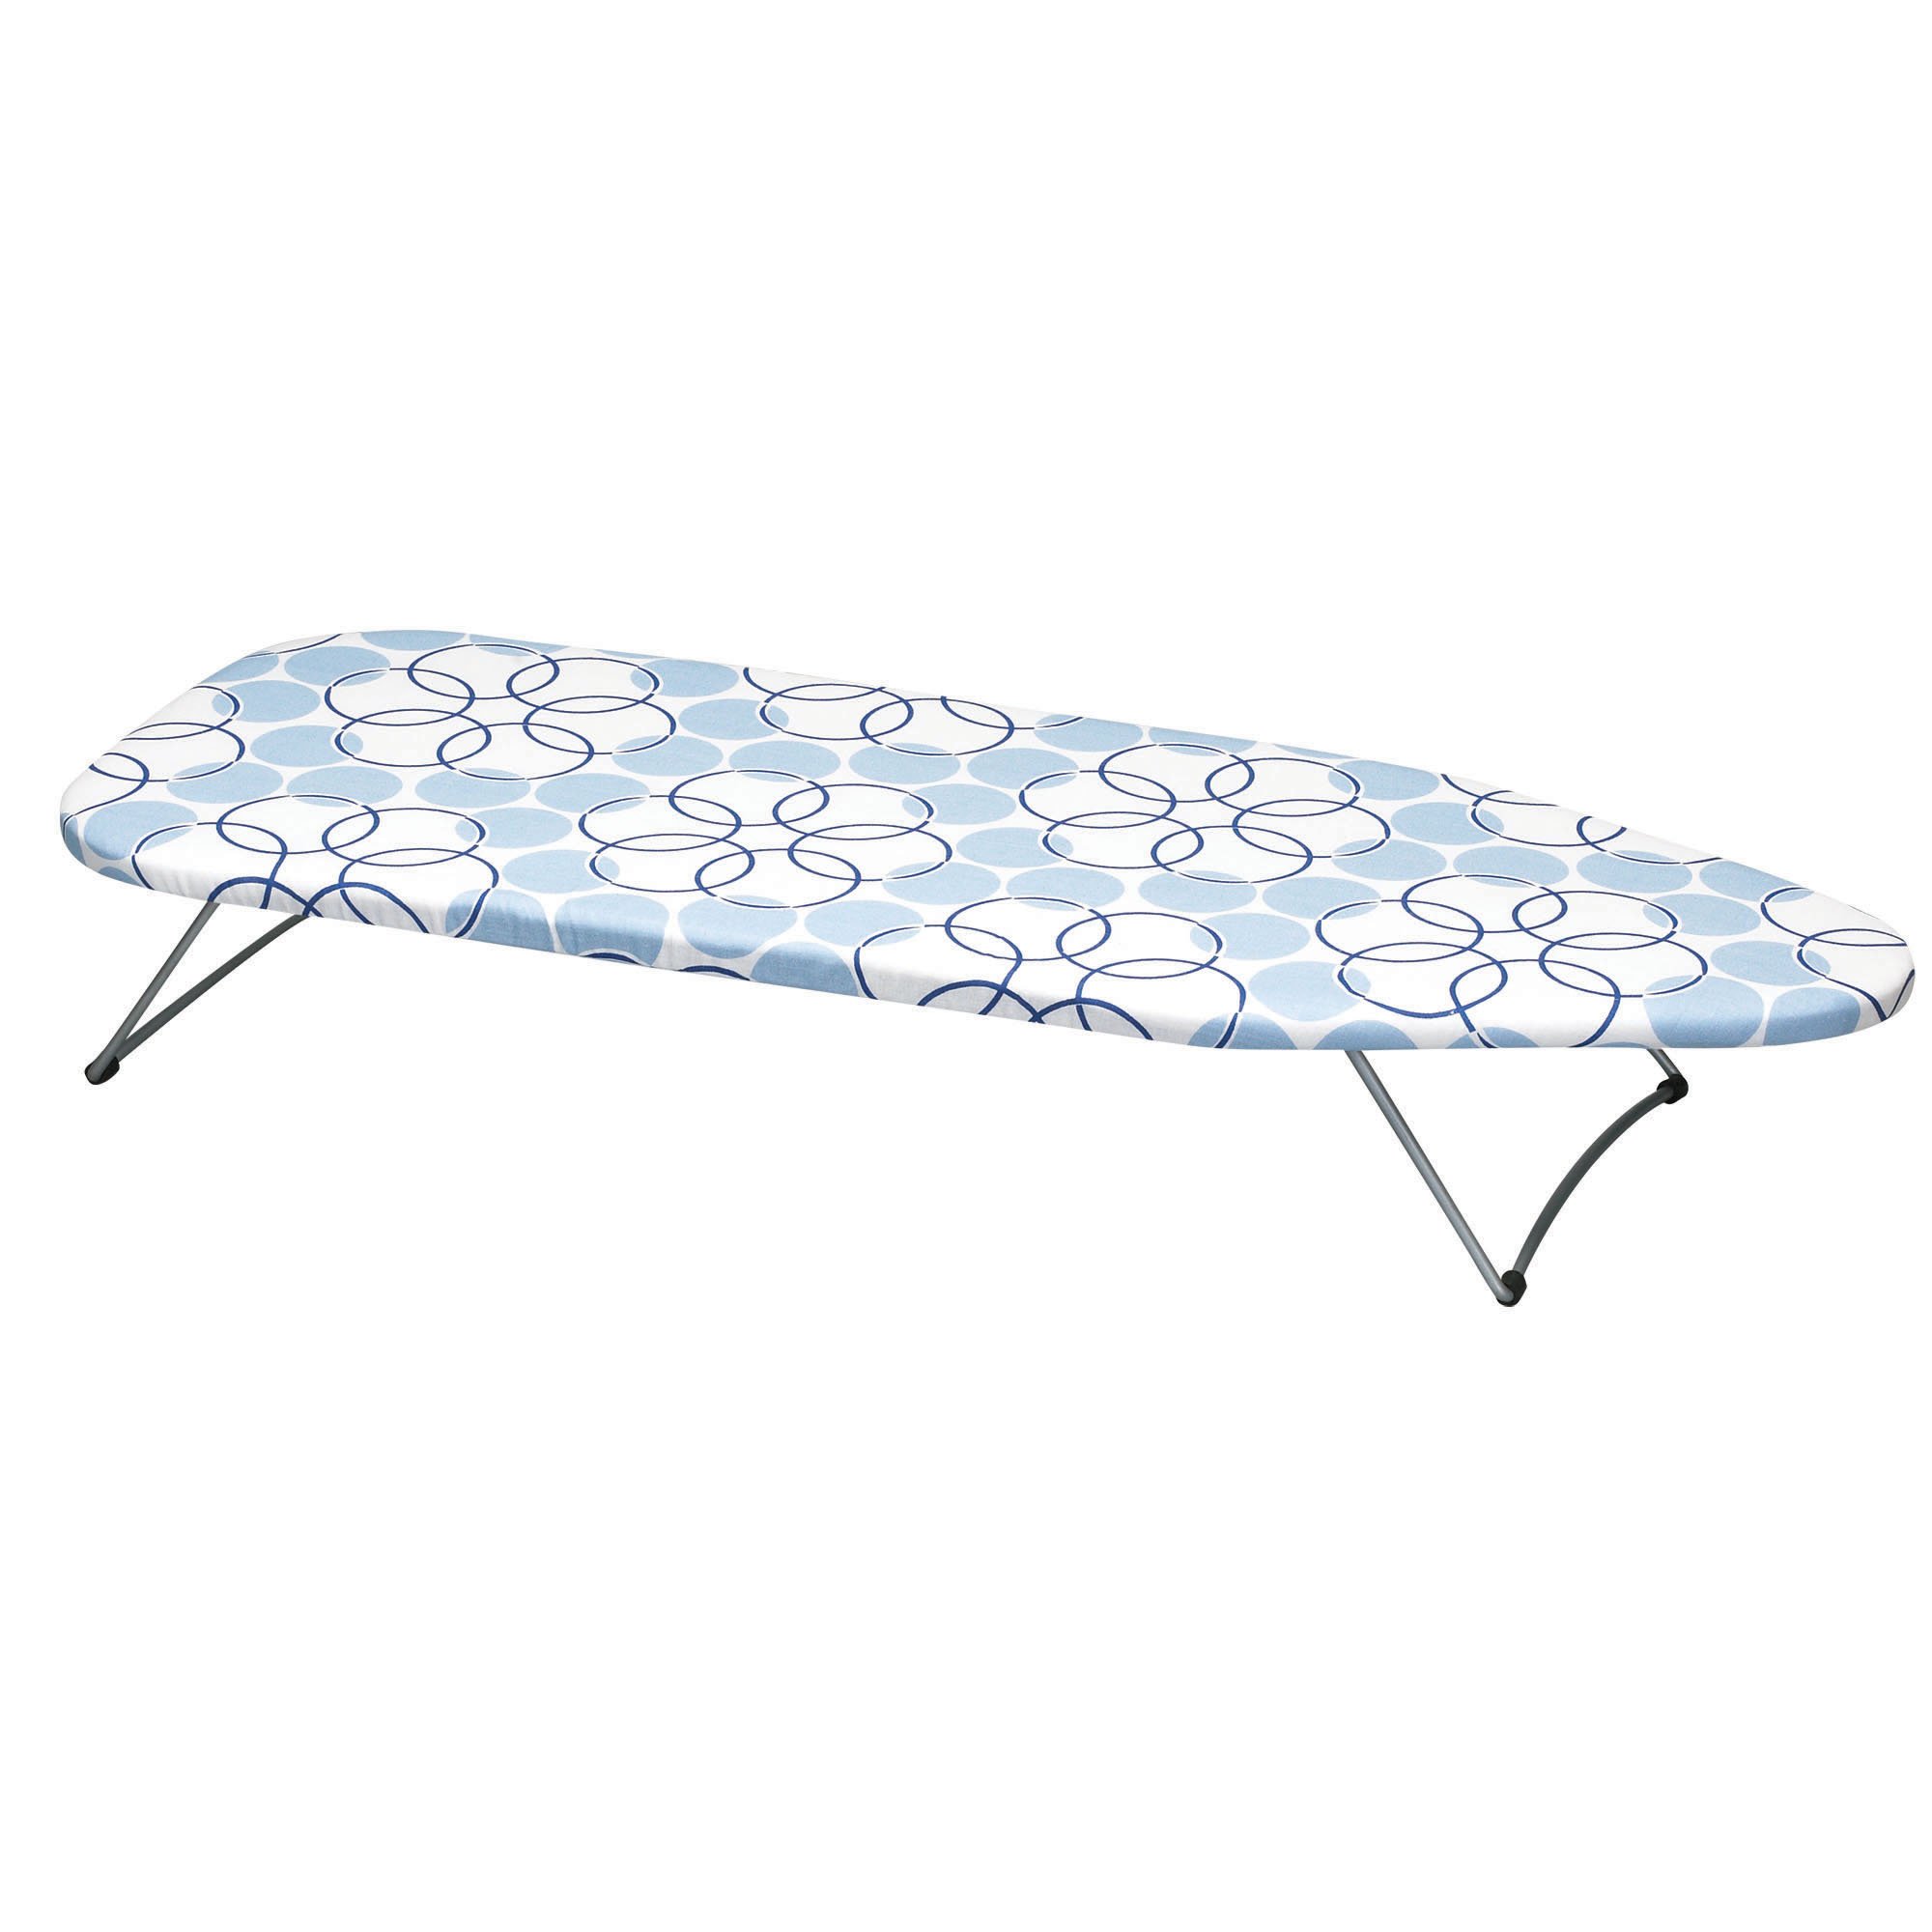 Household Essentials 122101 Small Tabletop Ironing Board with Folding Legs - Magic Rings Cover and Pad,Blue Rings